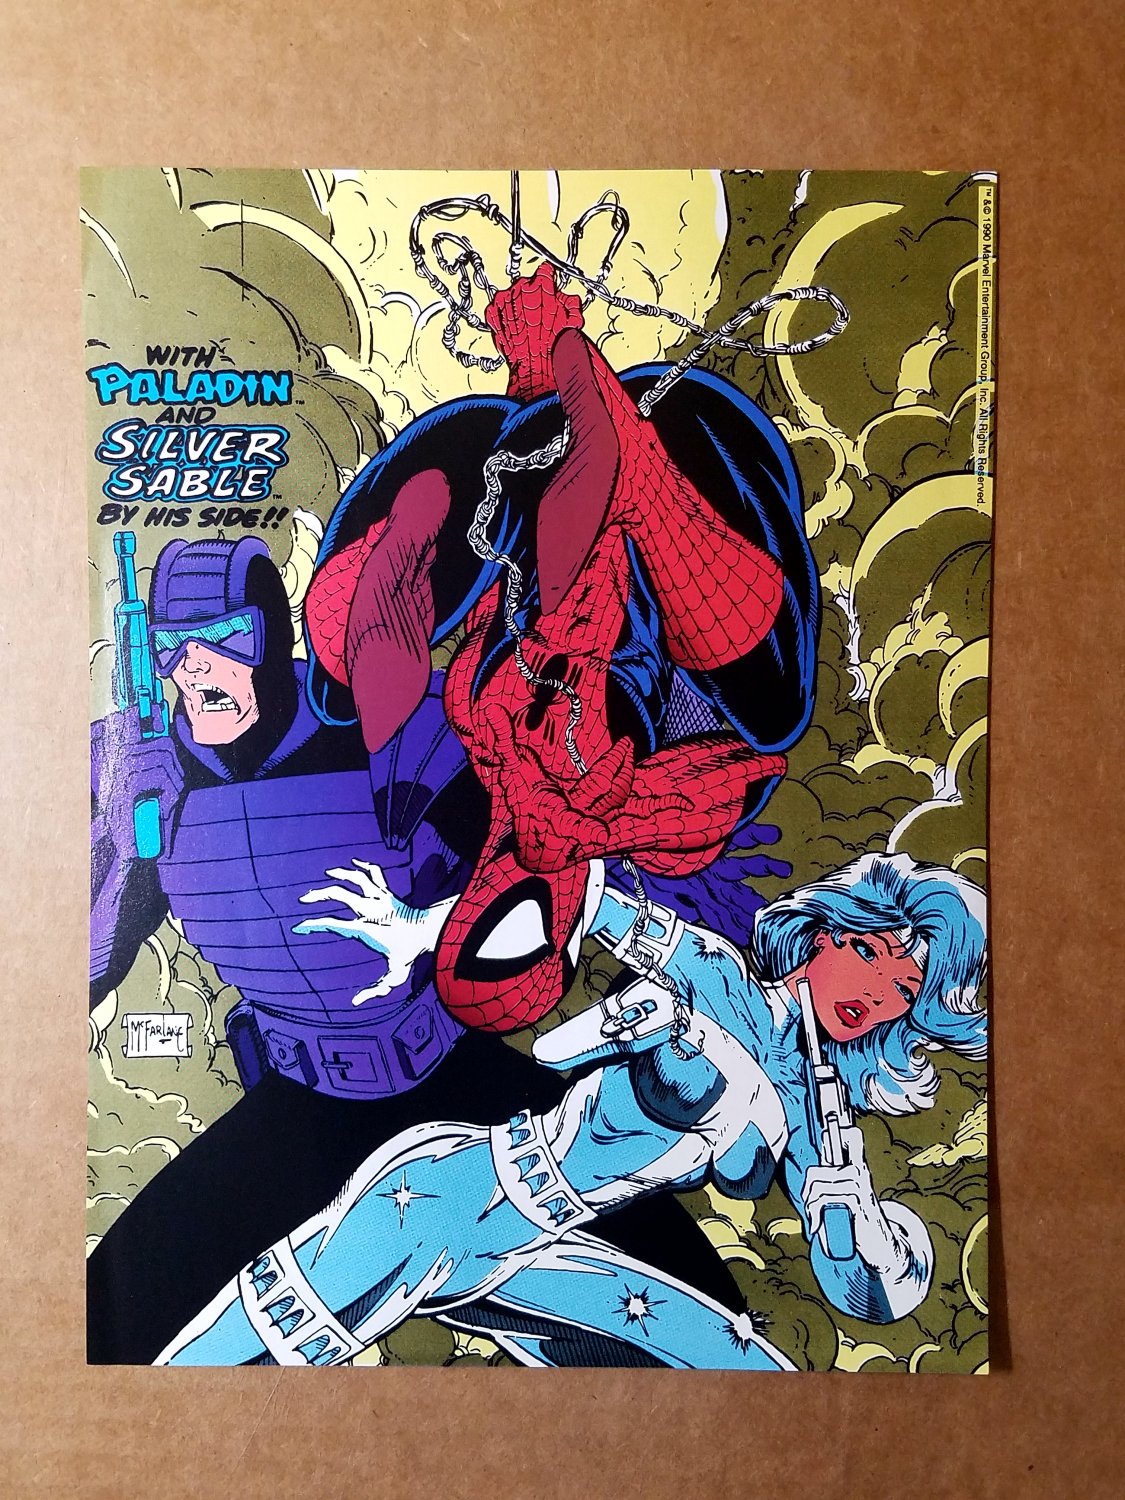 Spider-Man Silver Sable Marvel Comics Mini Poster by Todd McFarlane.